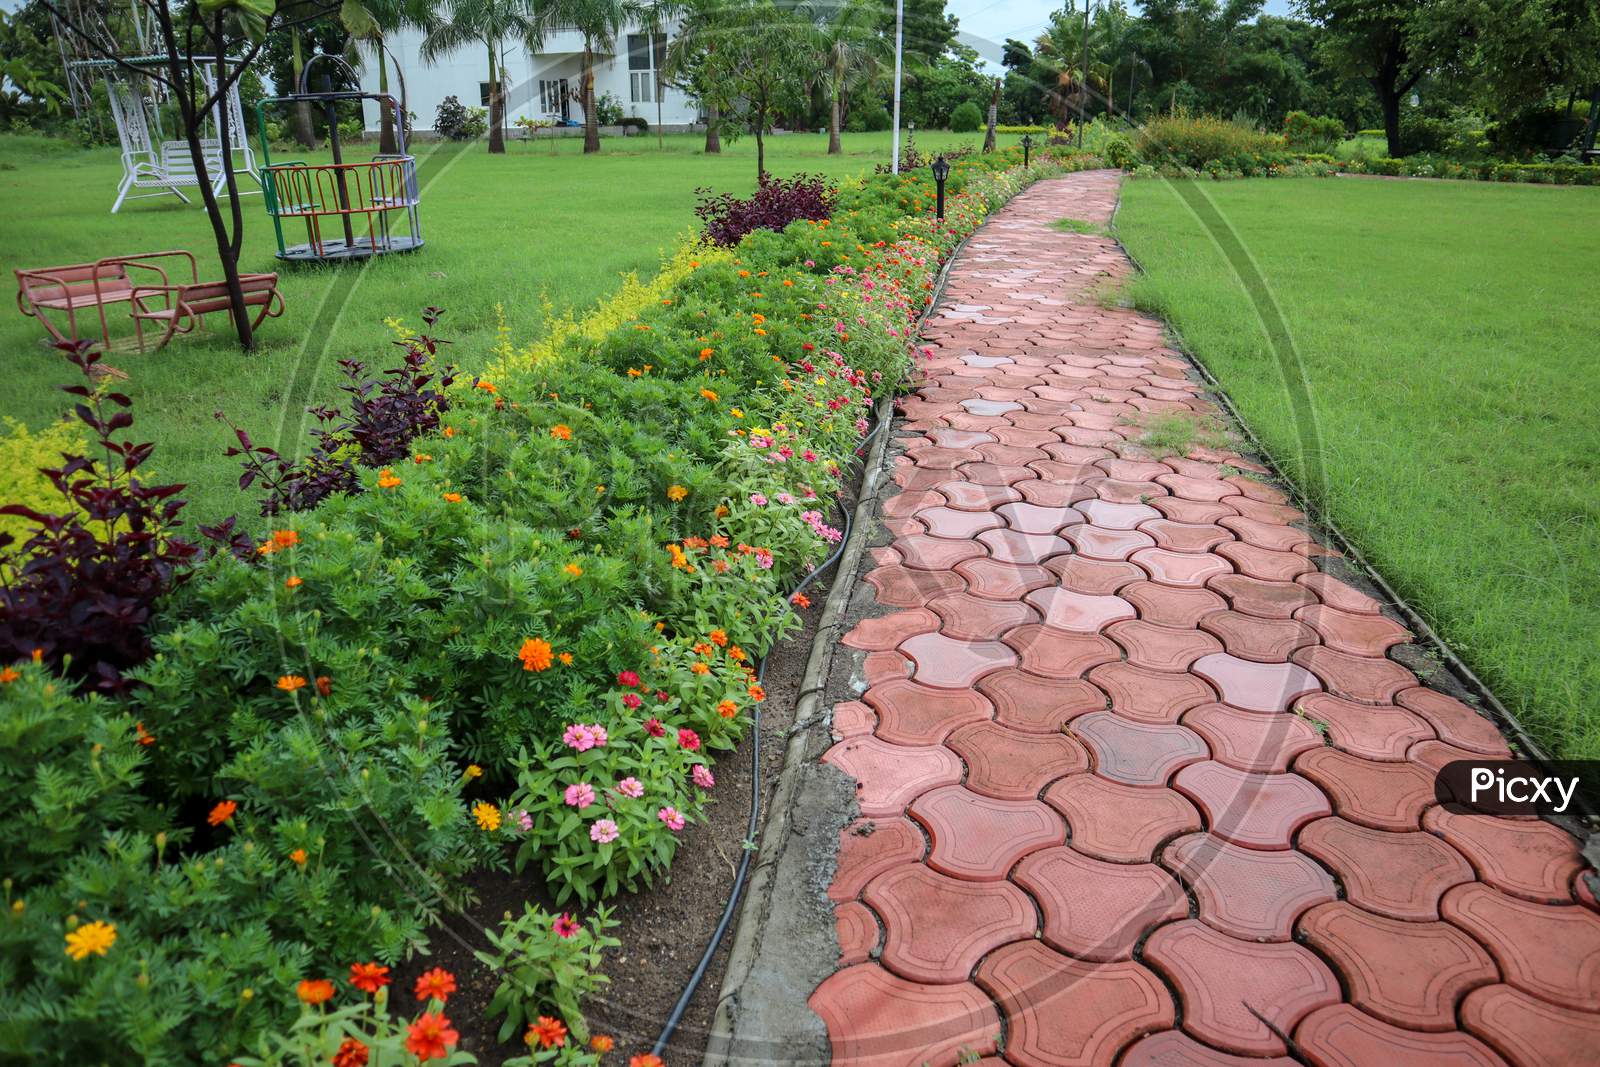 Beautiful Footpath In A Park With Colorful Flowers.